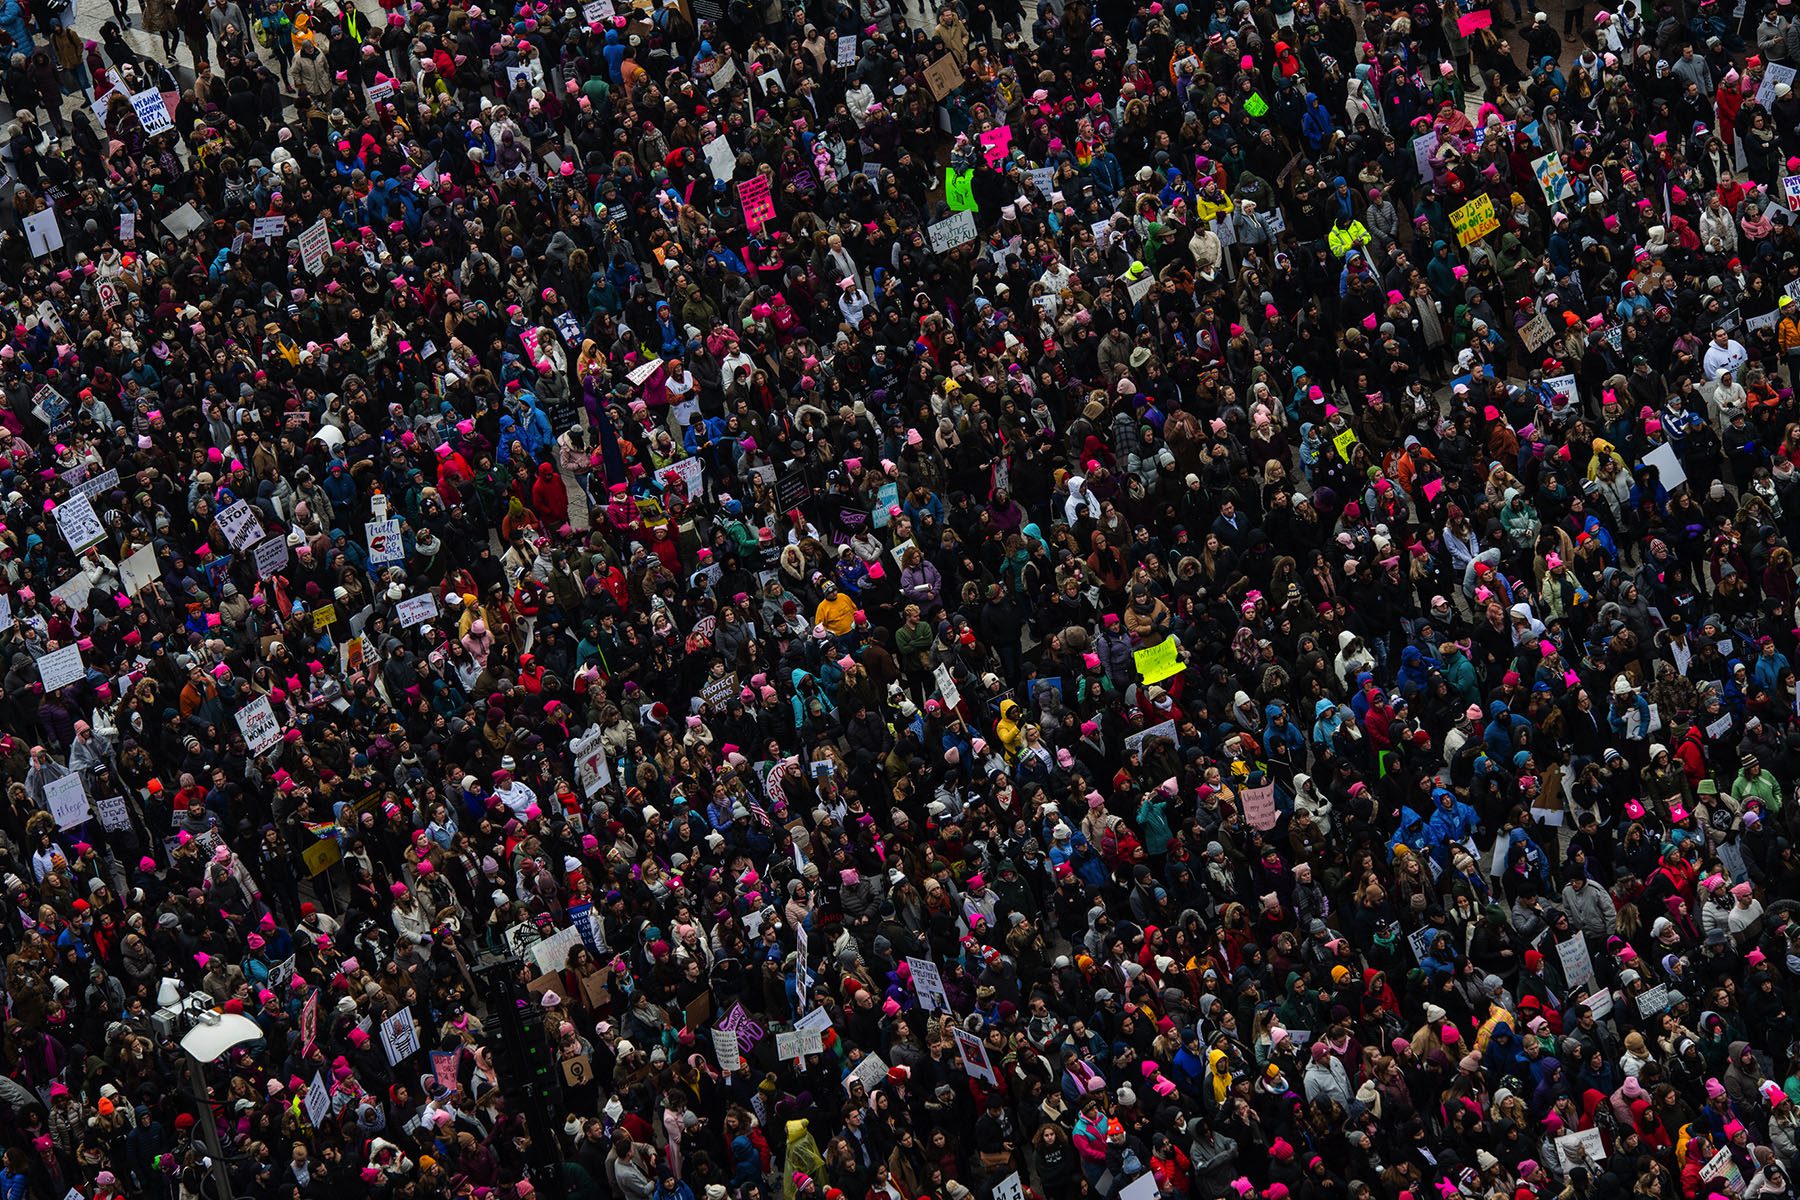 A bird's eye view of demonstrators at the 2019 Women's March.